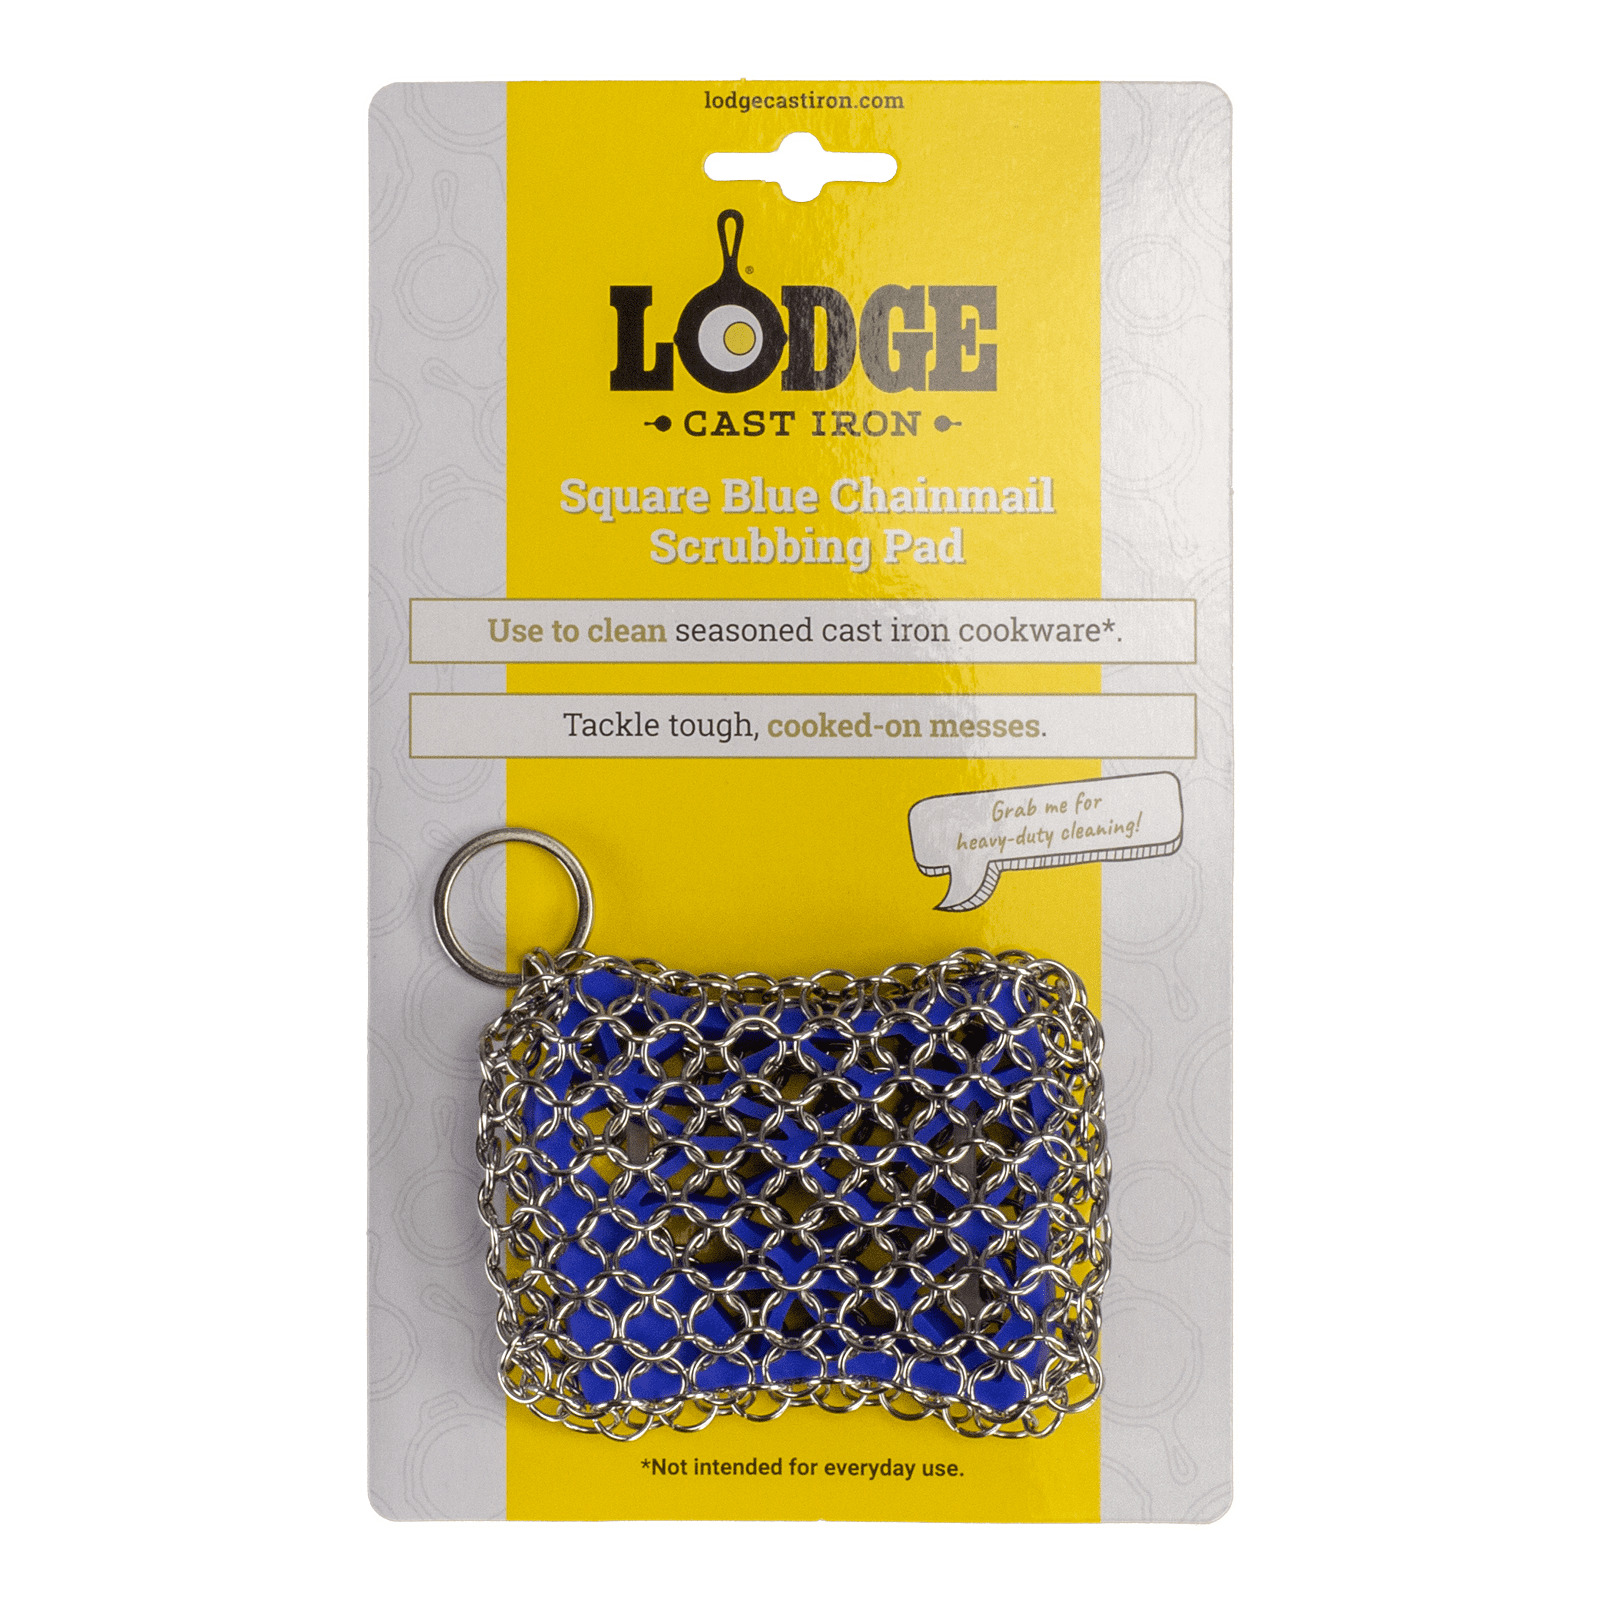 New Lodge Cast Iron Square Chainmail Scrubbing Pad, 1, Blue